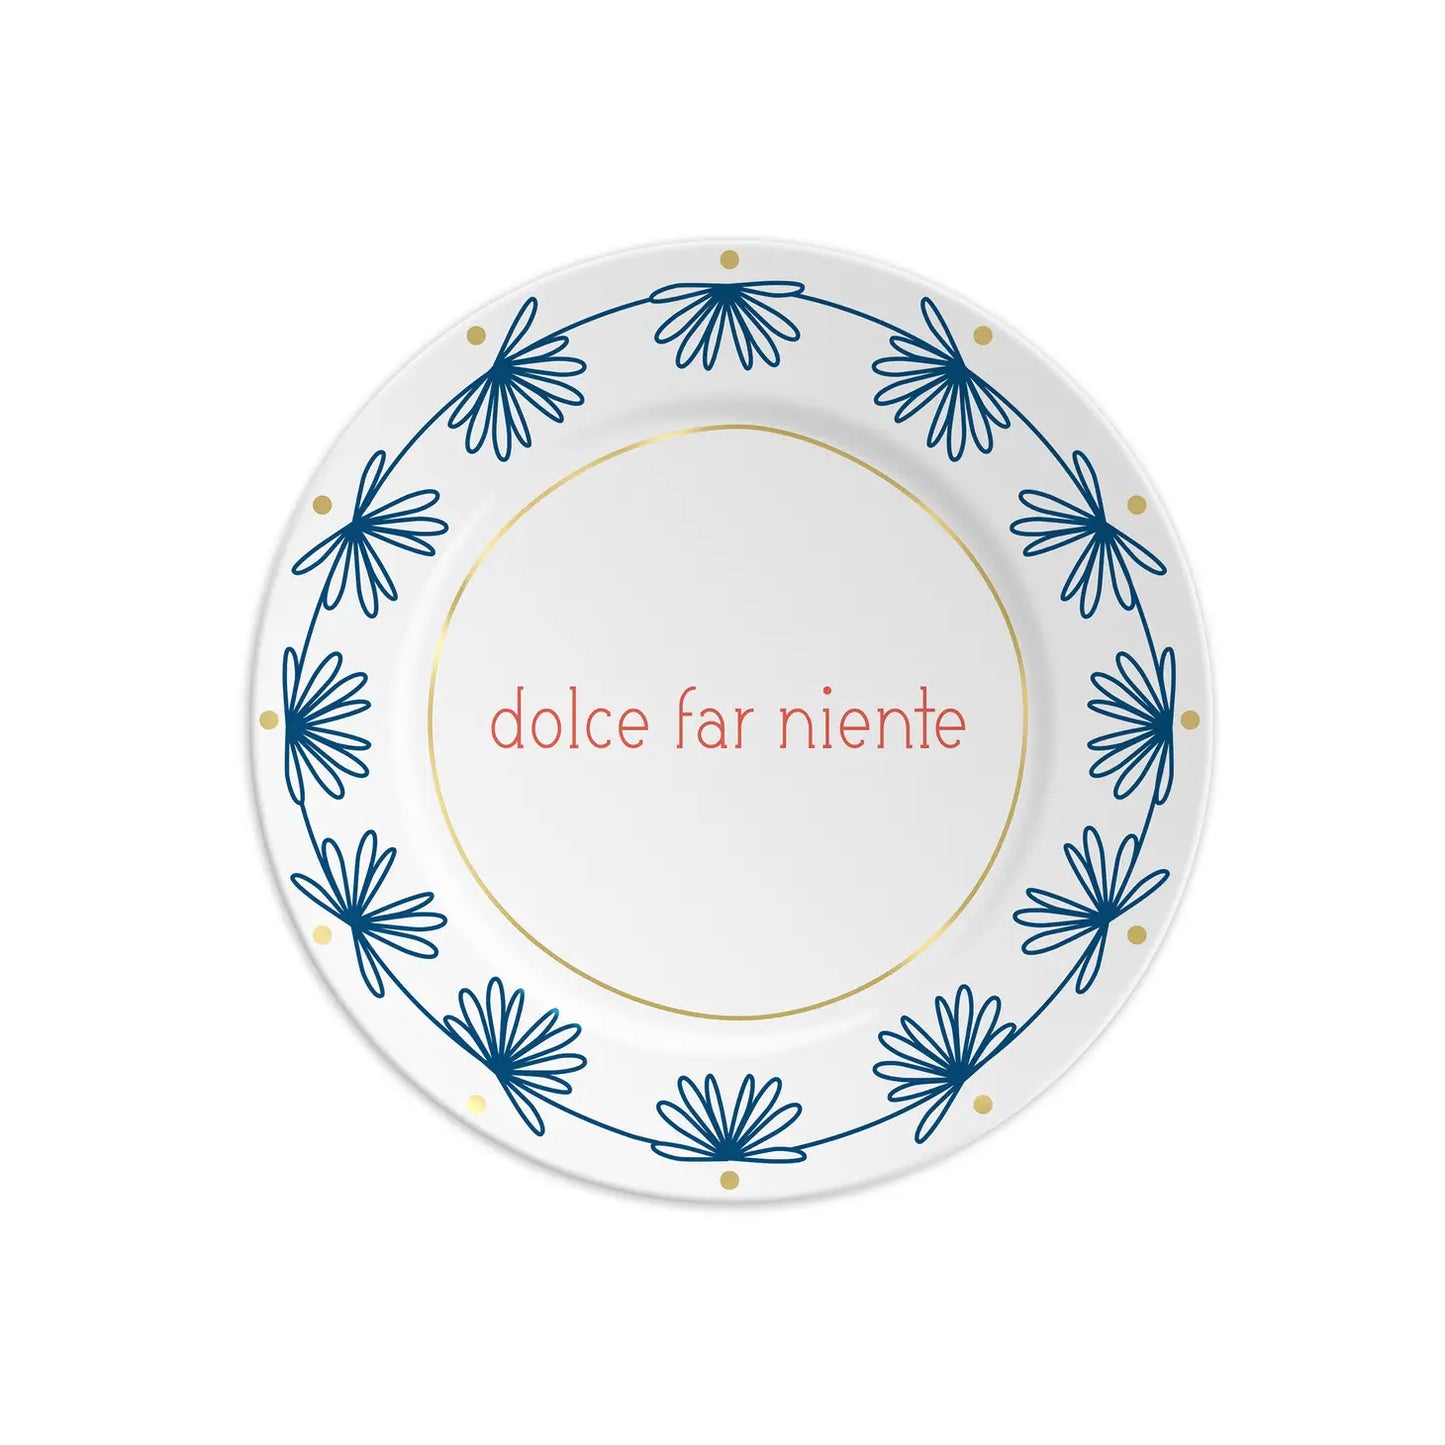 Dolce Far Niente Small Porcelain Plate - Curated Home Decor